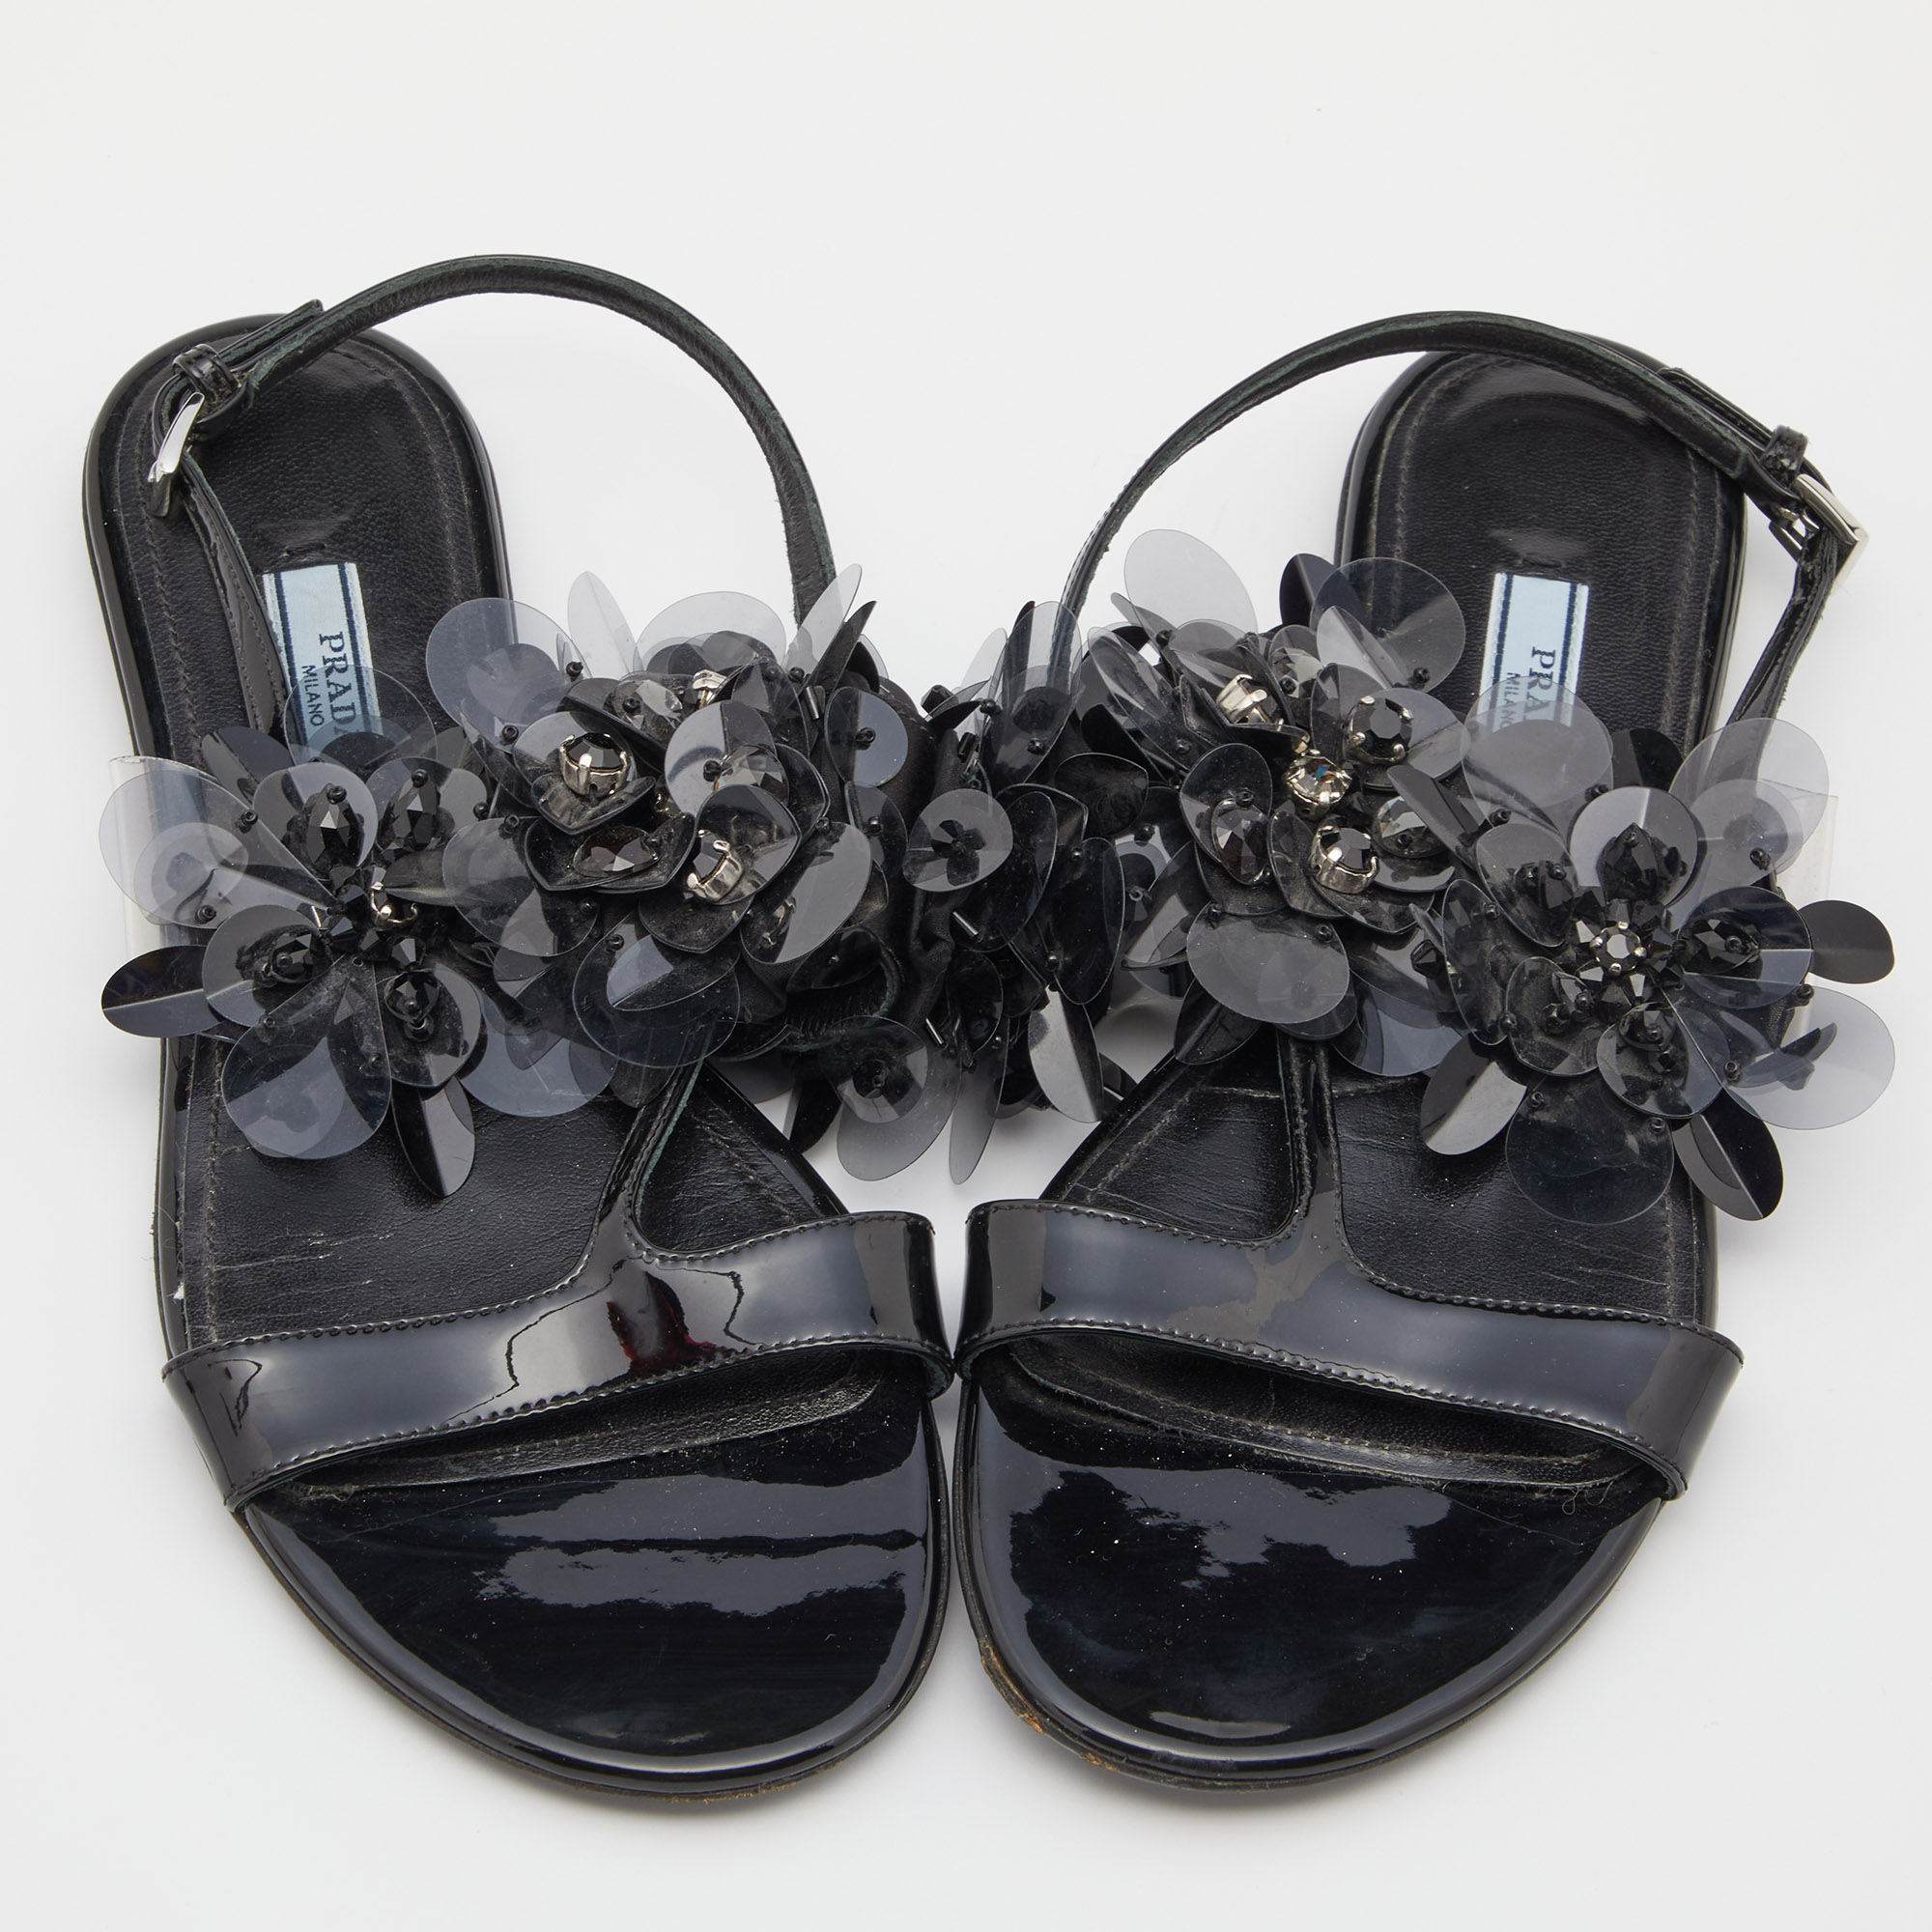 Prada Black Patent Leather And PVC Crystal/Beads Embellished Flat Sandals Size 38